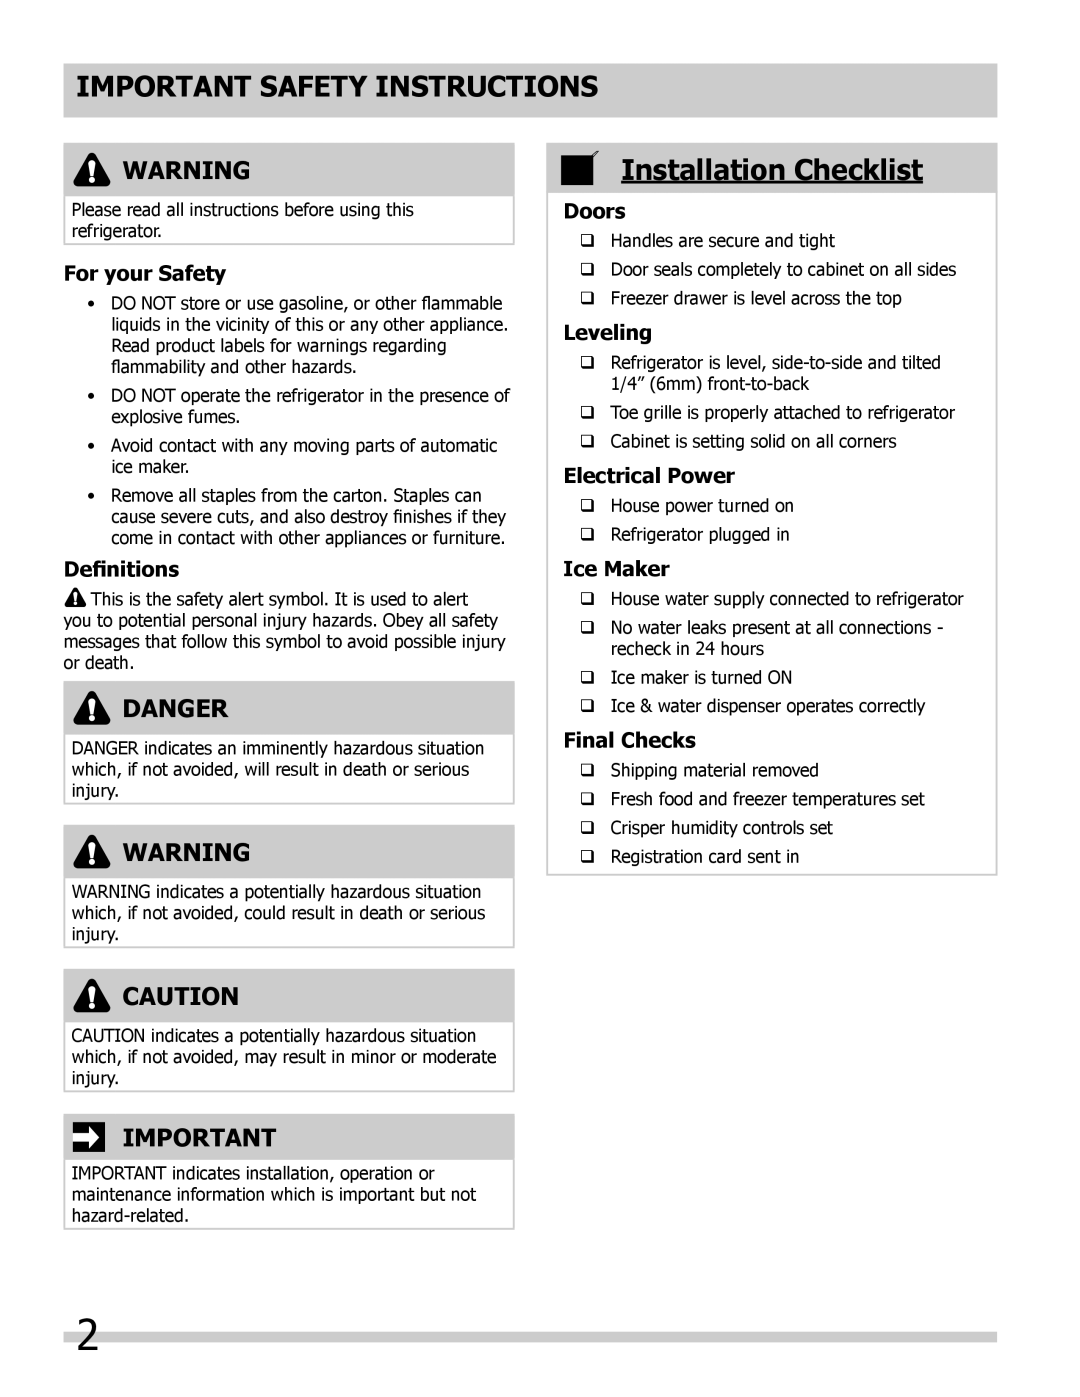 Frigidaire FGHB2844LF5 Important Safety Instructions, Installation Checklist, Danger, For your Safety, Definitions, Doors 